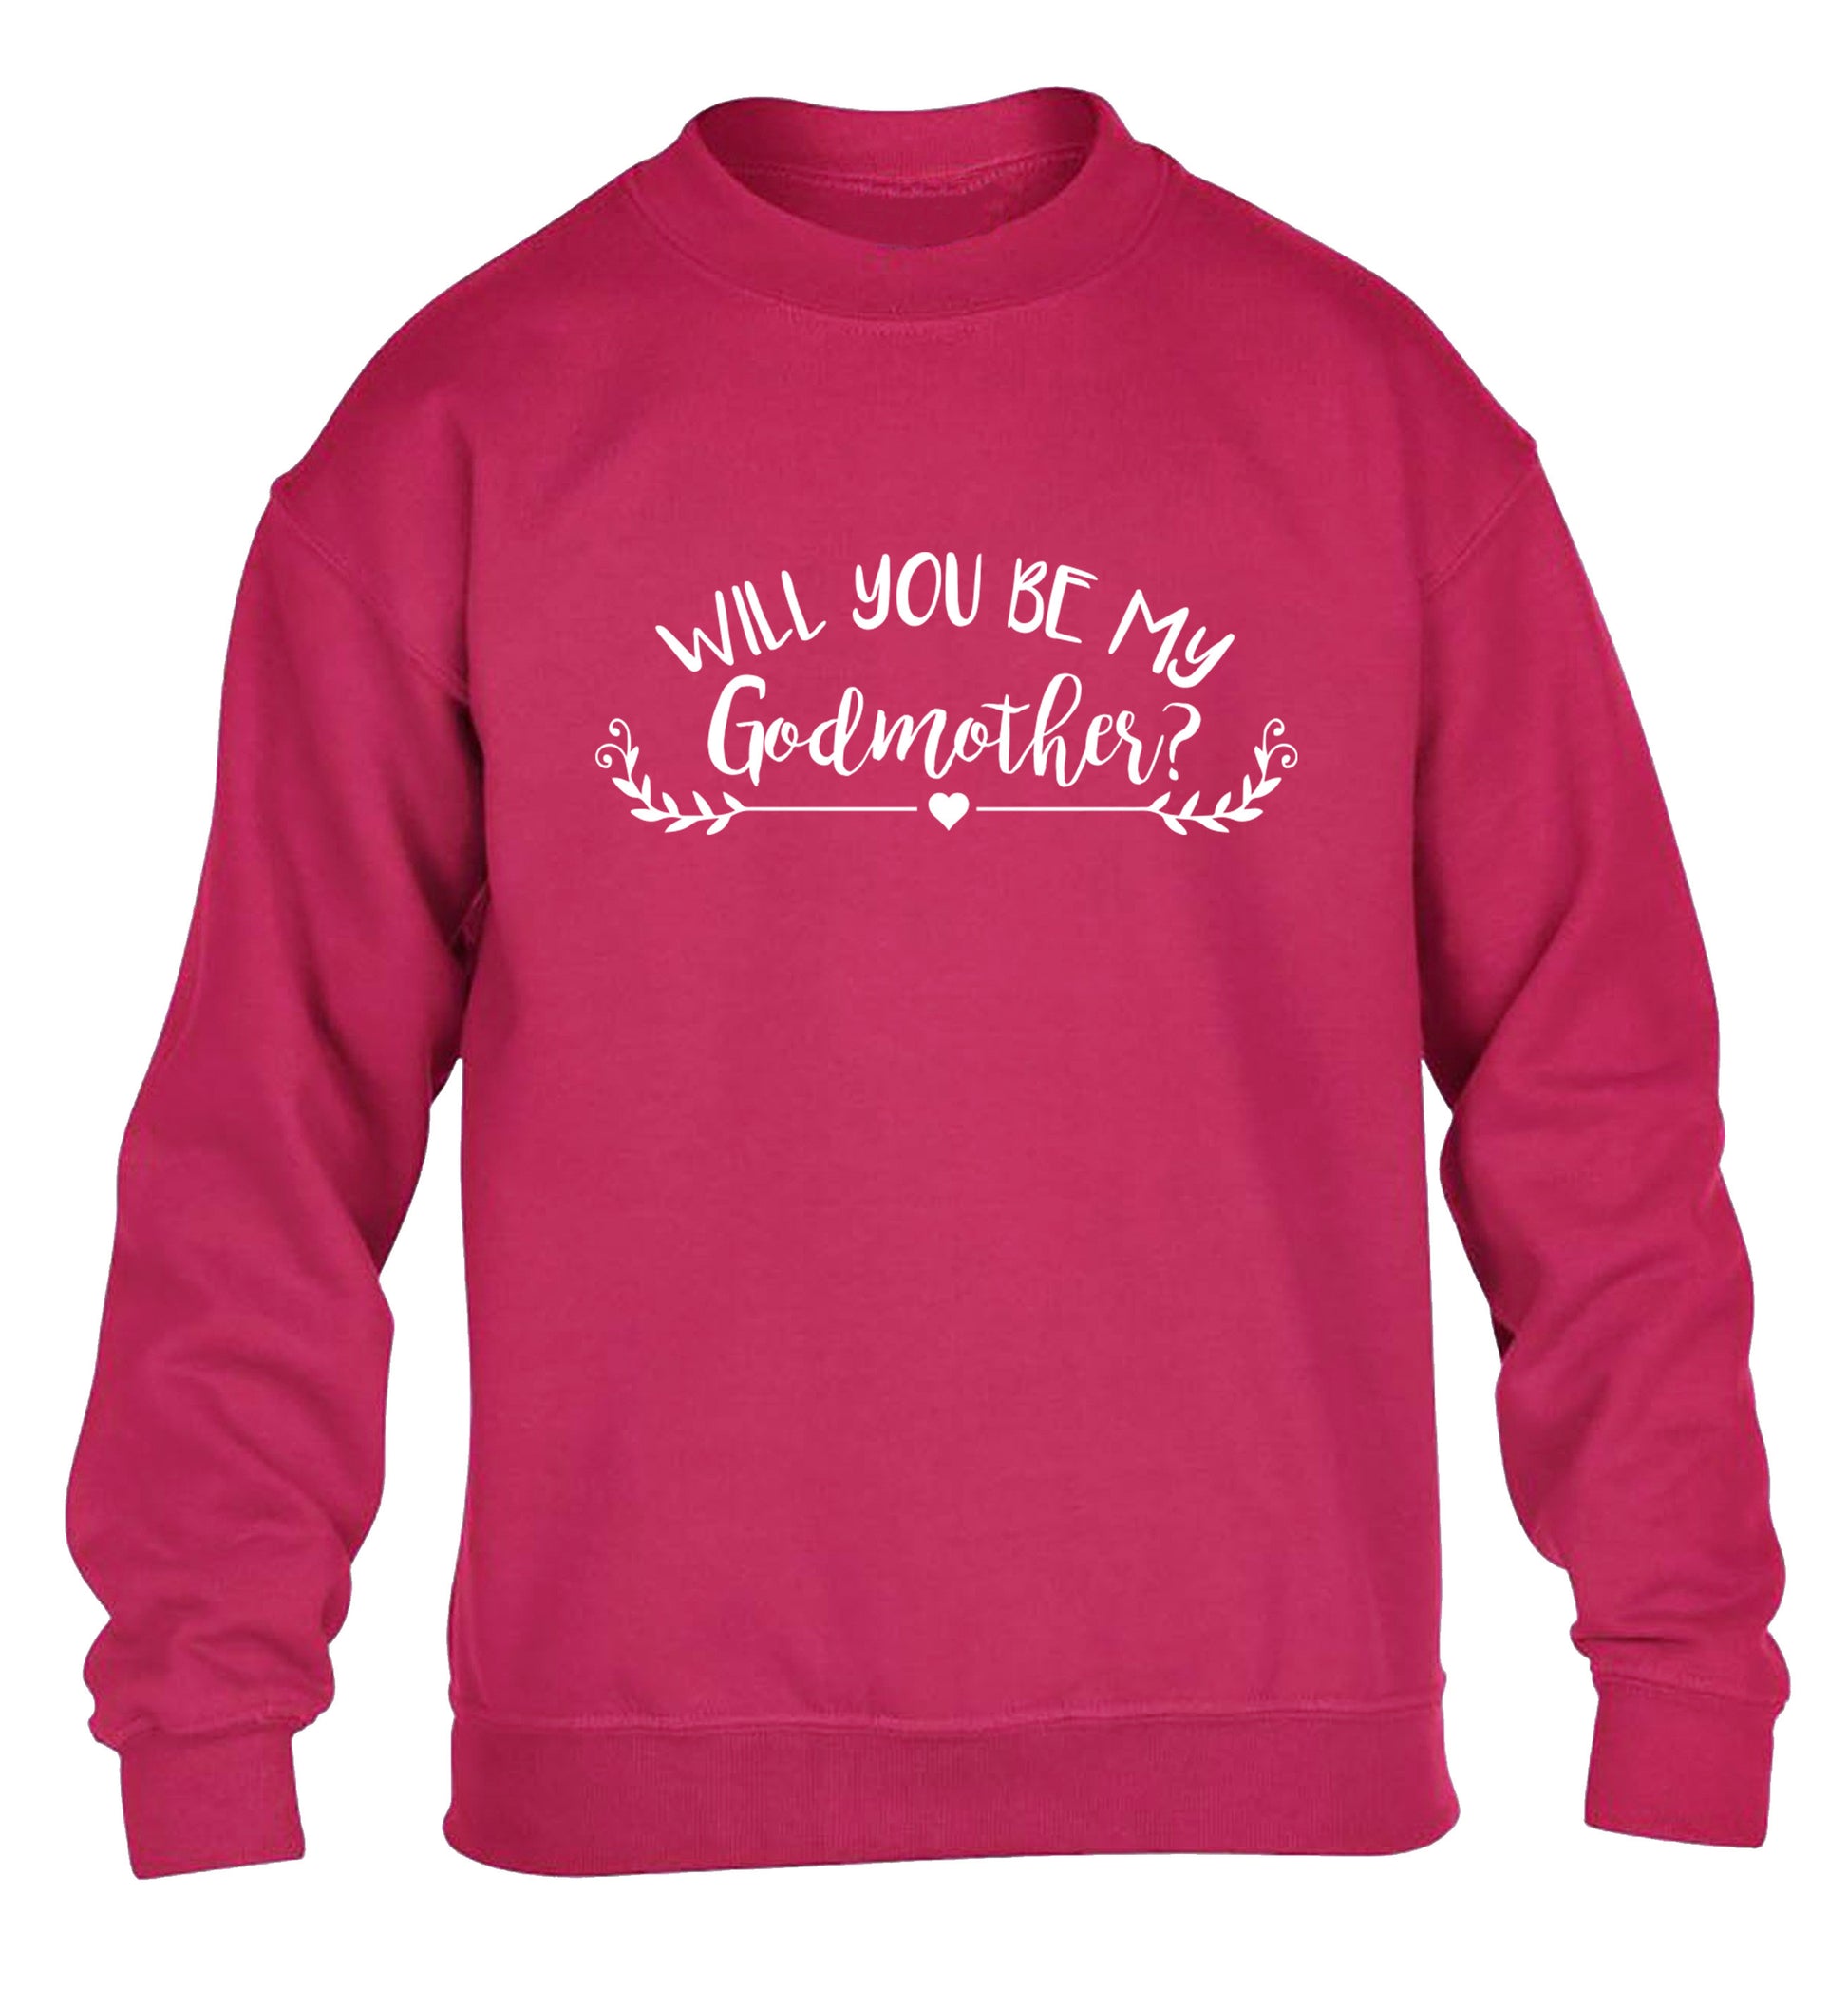 Will you be my godmother? children's pink sweater 12-14 Years